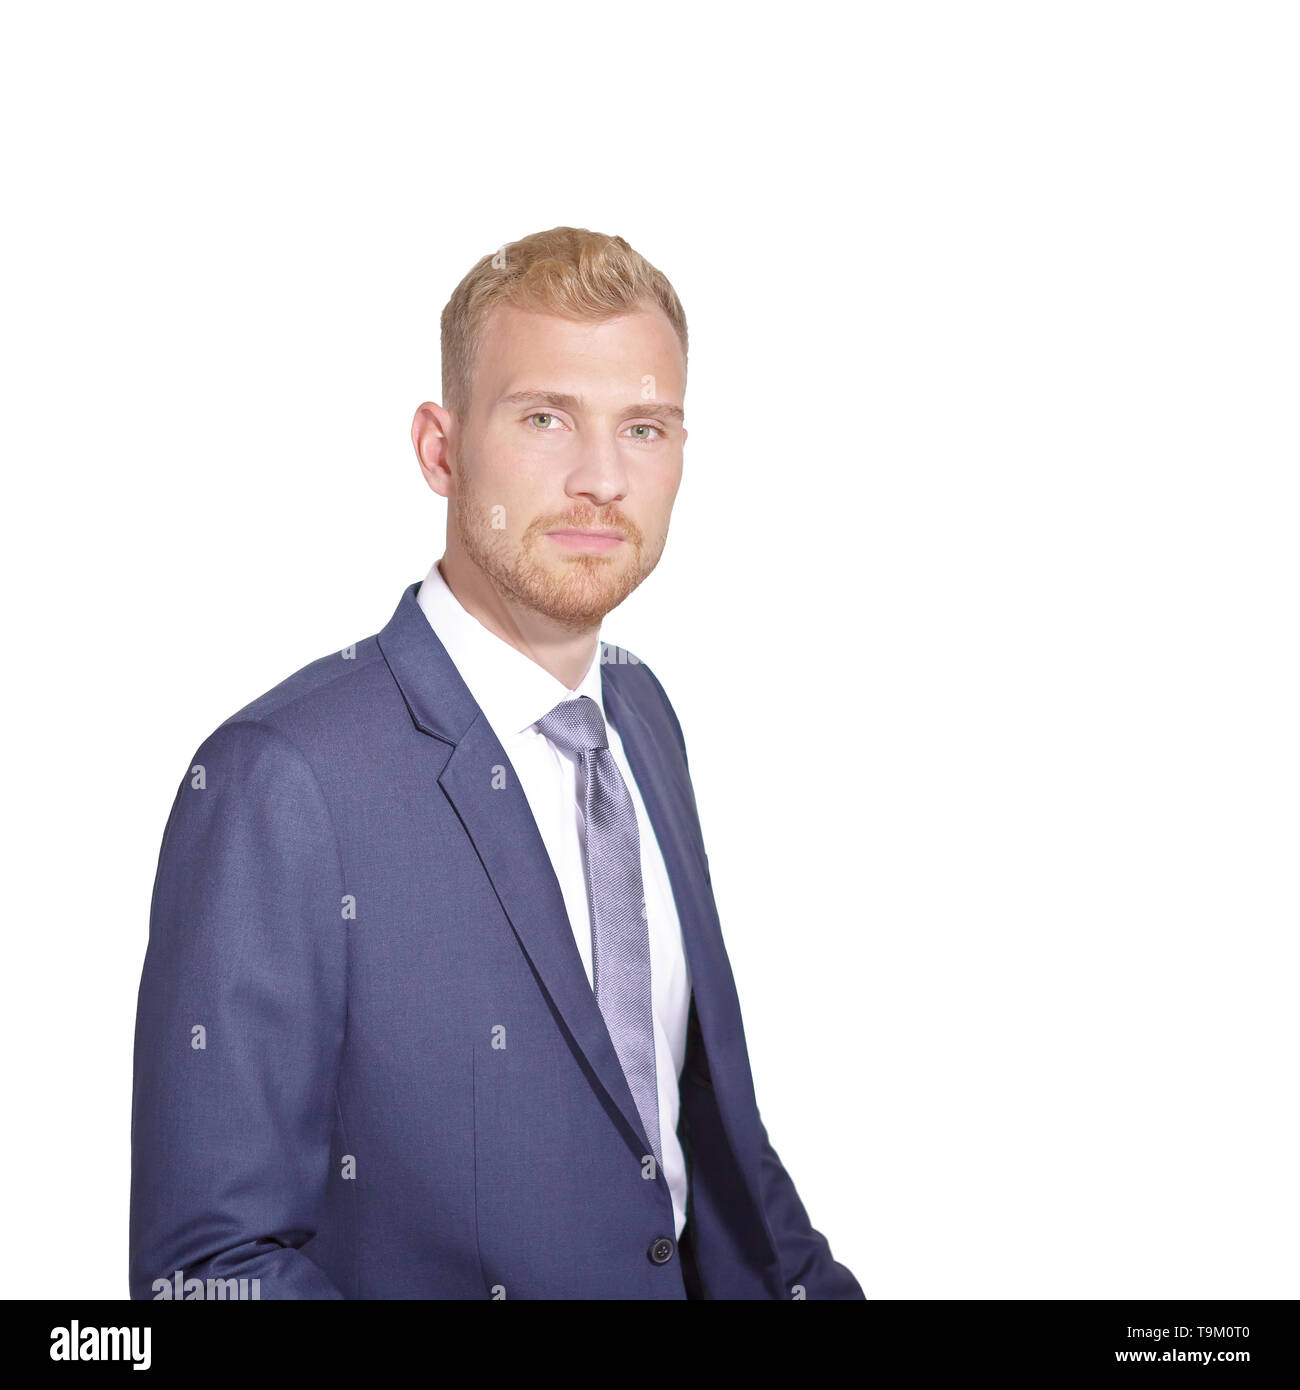 Businessman in his 20s in front of a white background, wearing a blue suit and tie, looking confident. Stock Photo